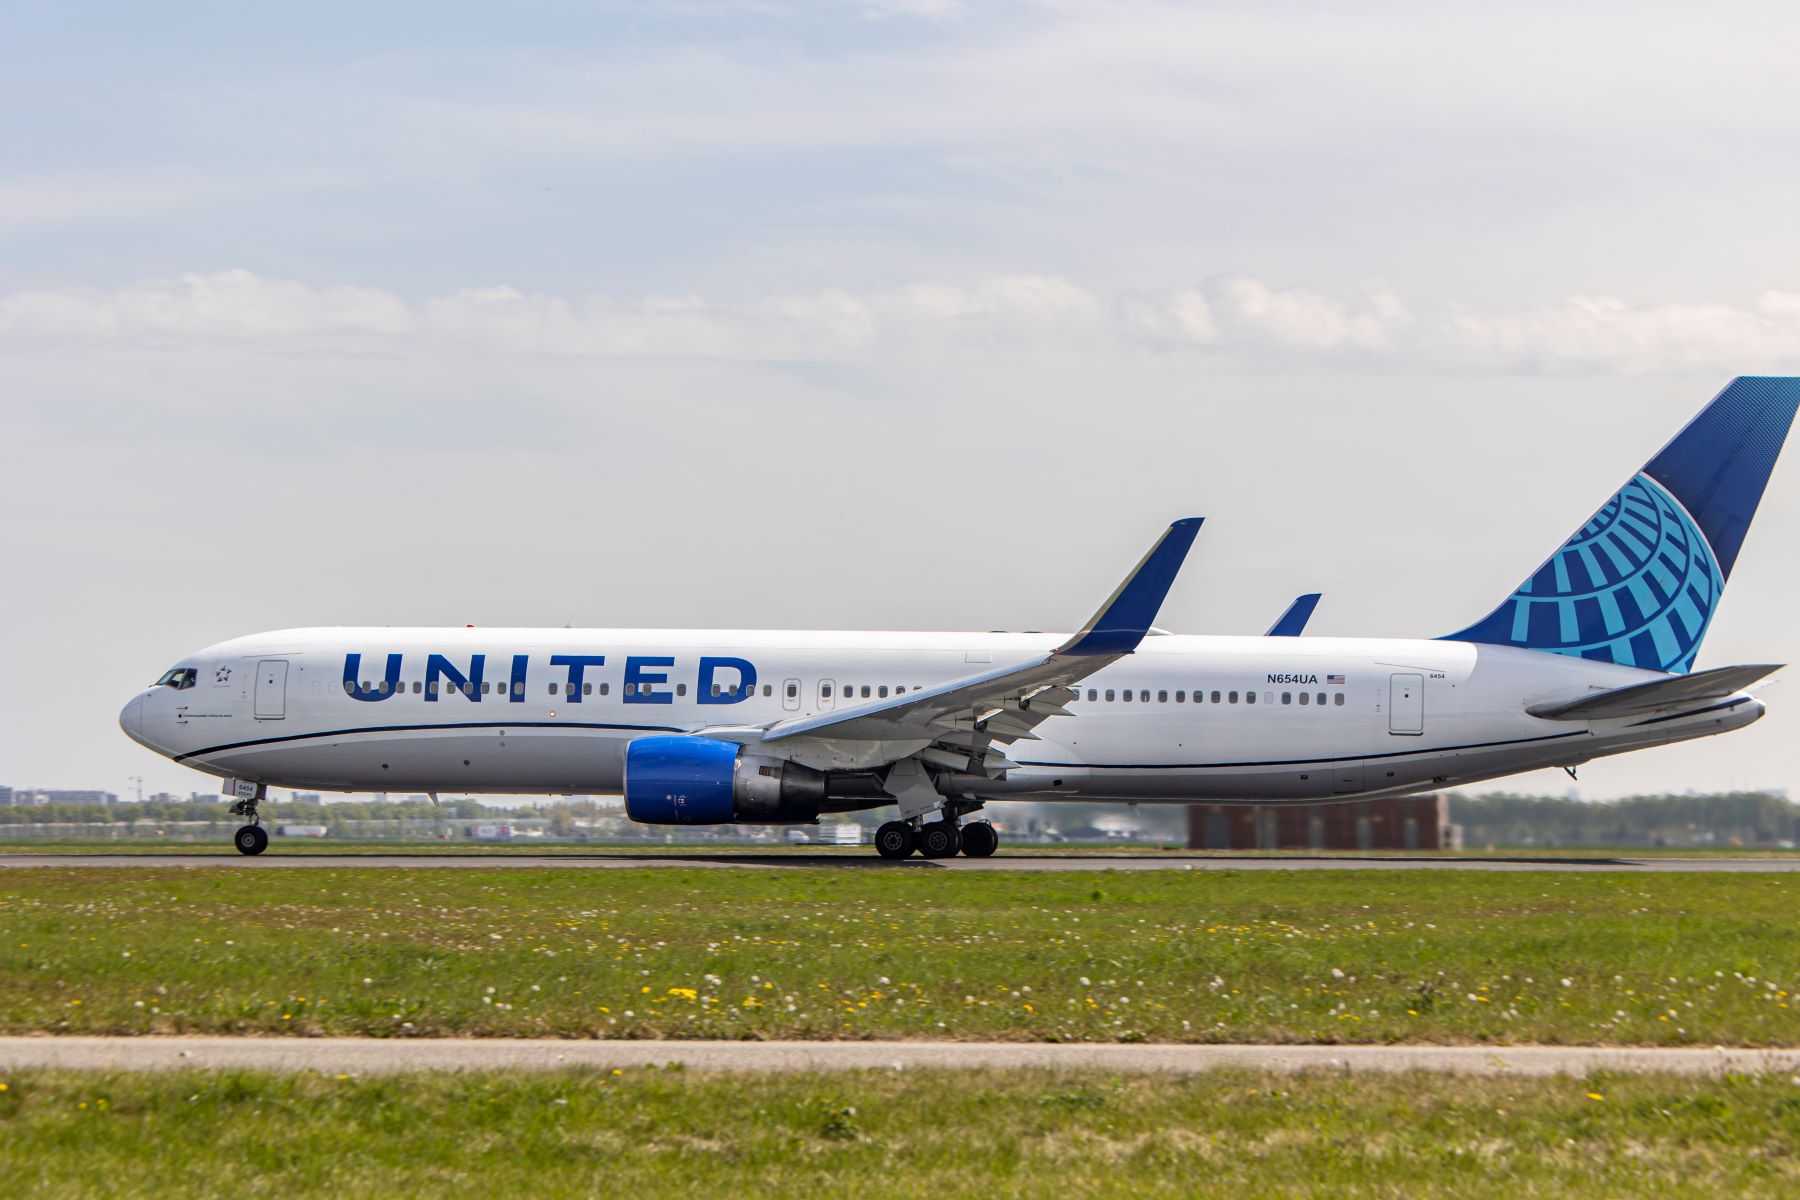 A United Airlines Boeing 767-300 aircraft model departing Amsterdam Schiphol Airport